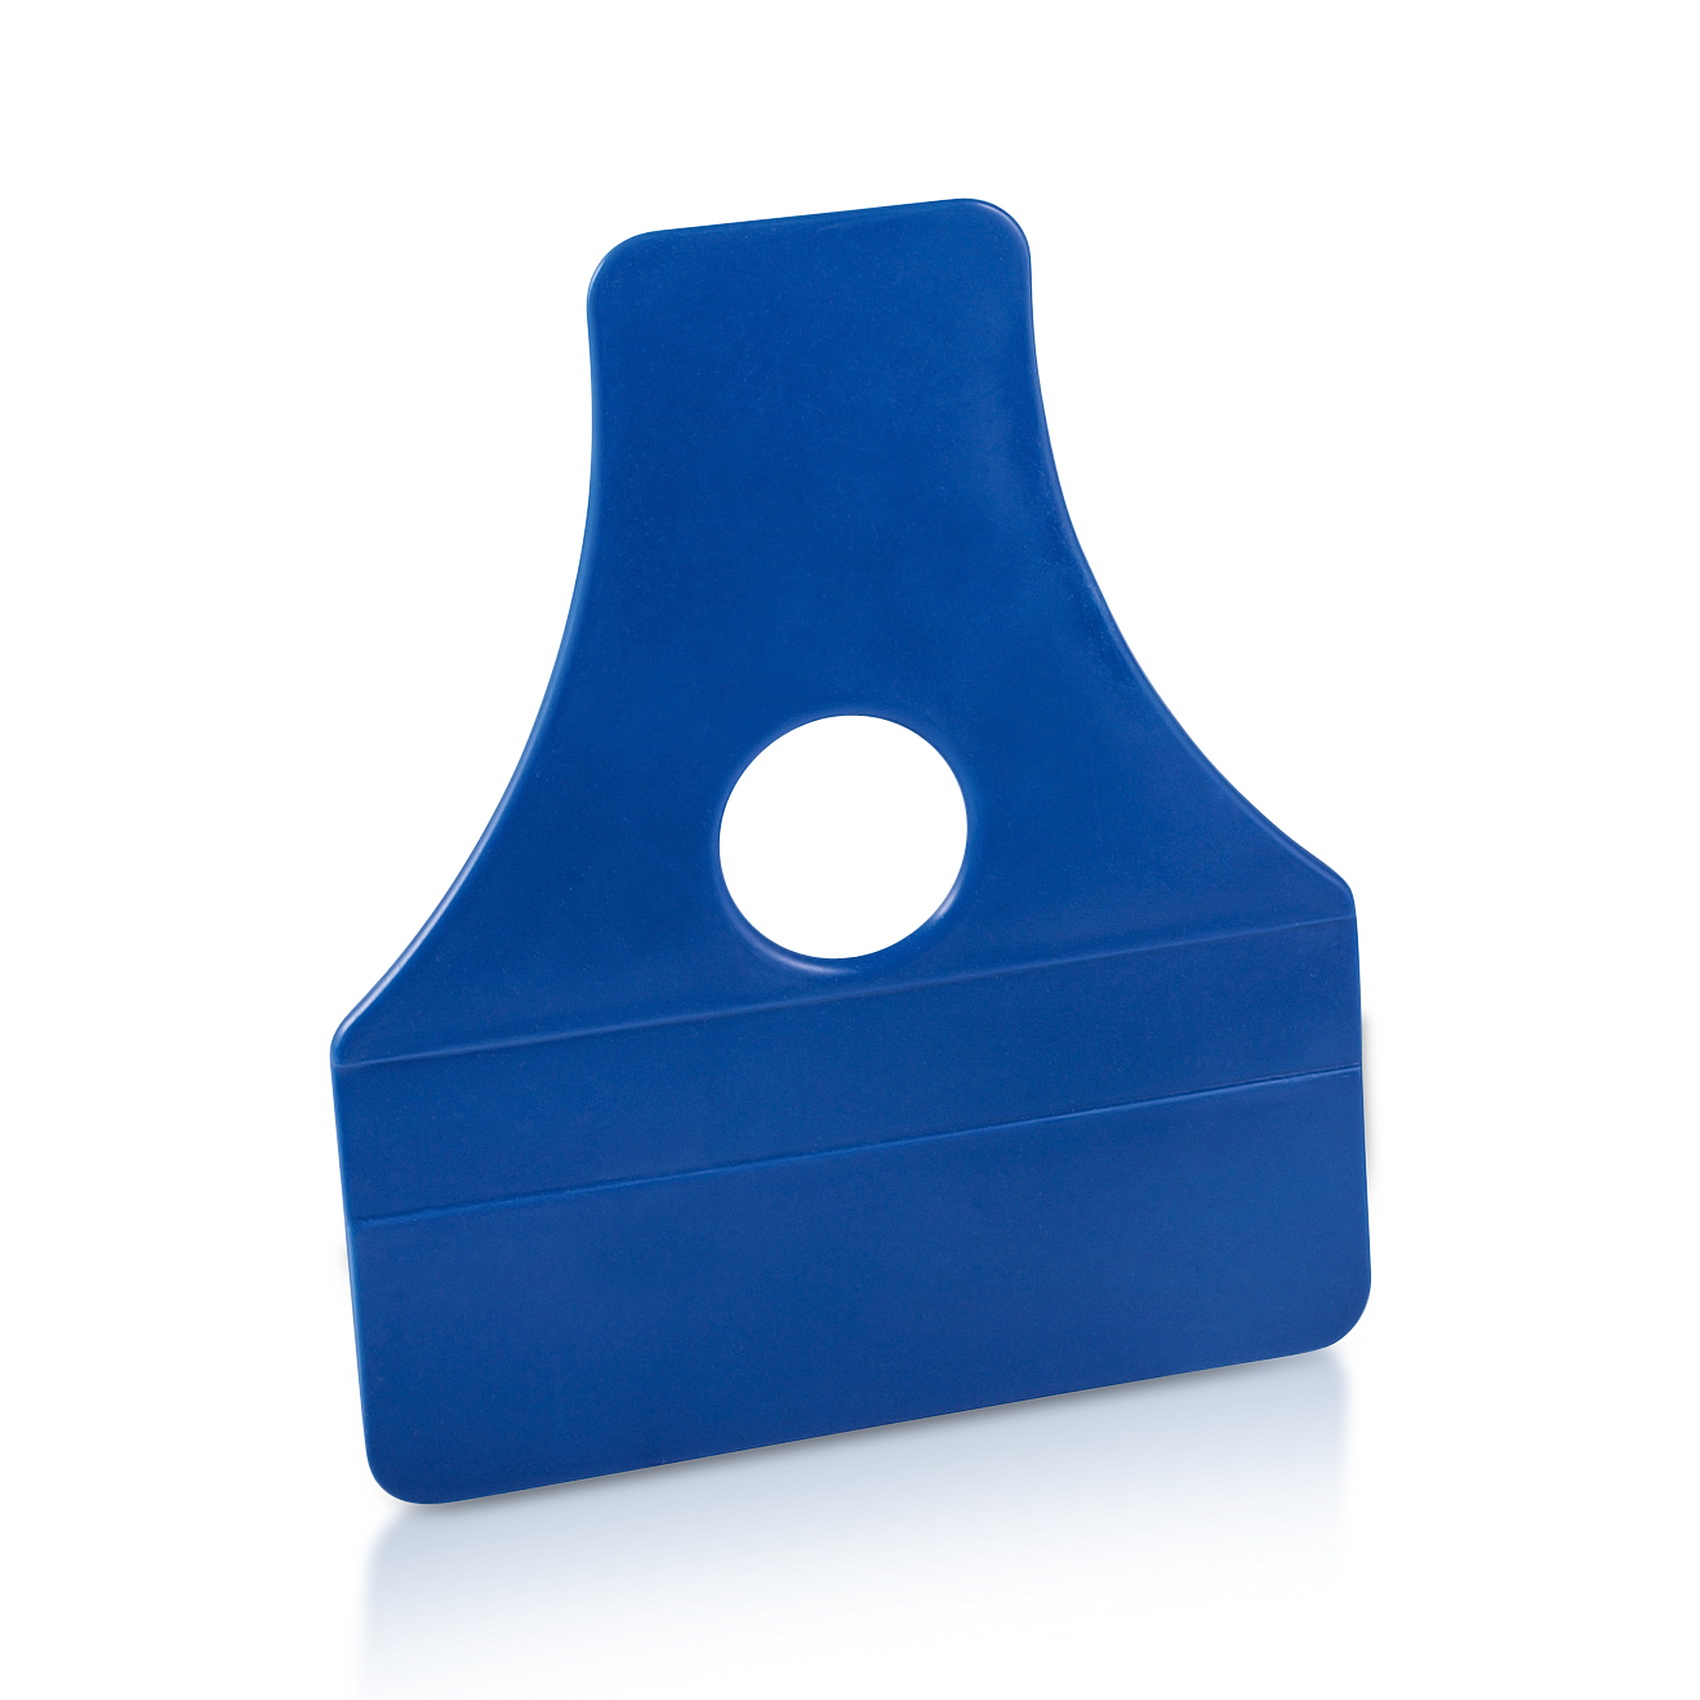 5'' x 4'' Blue Trapezoid Squeegee, Medium Hardness for Vinyl and Film Application